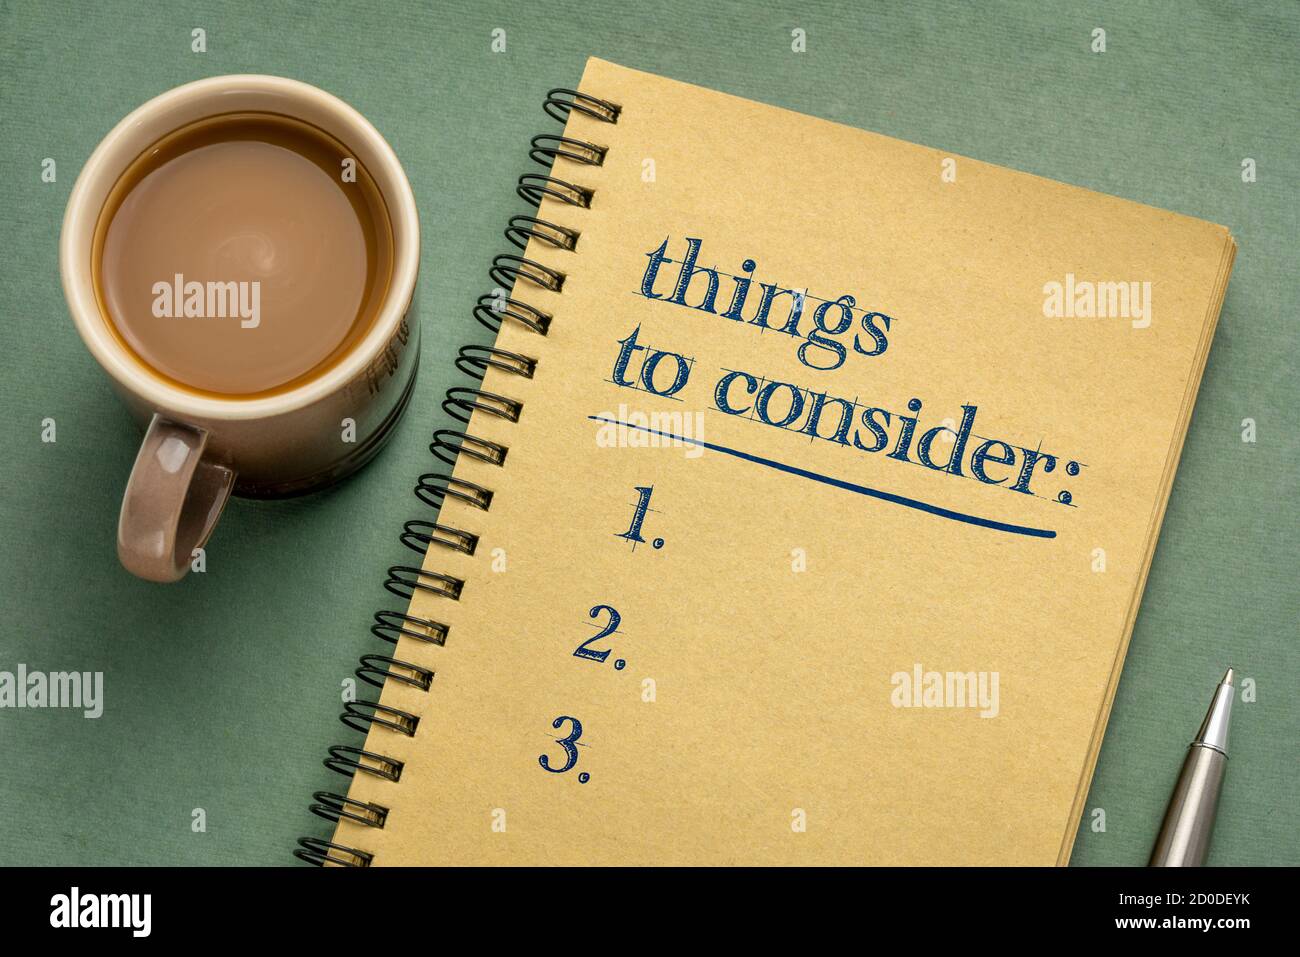 things to consider list - handwriting in a notebook with a cup of coffee, business planning concept Stock Photo